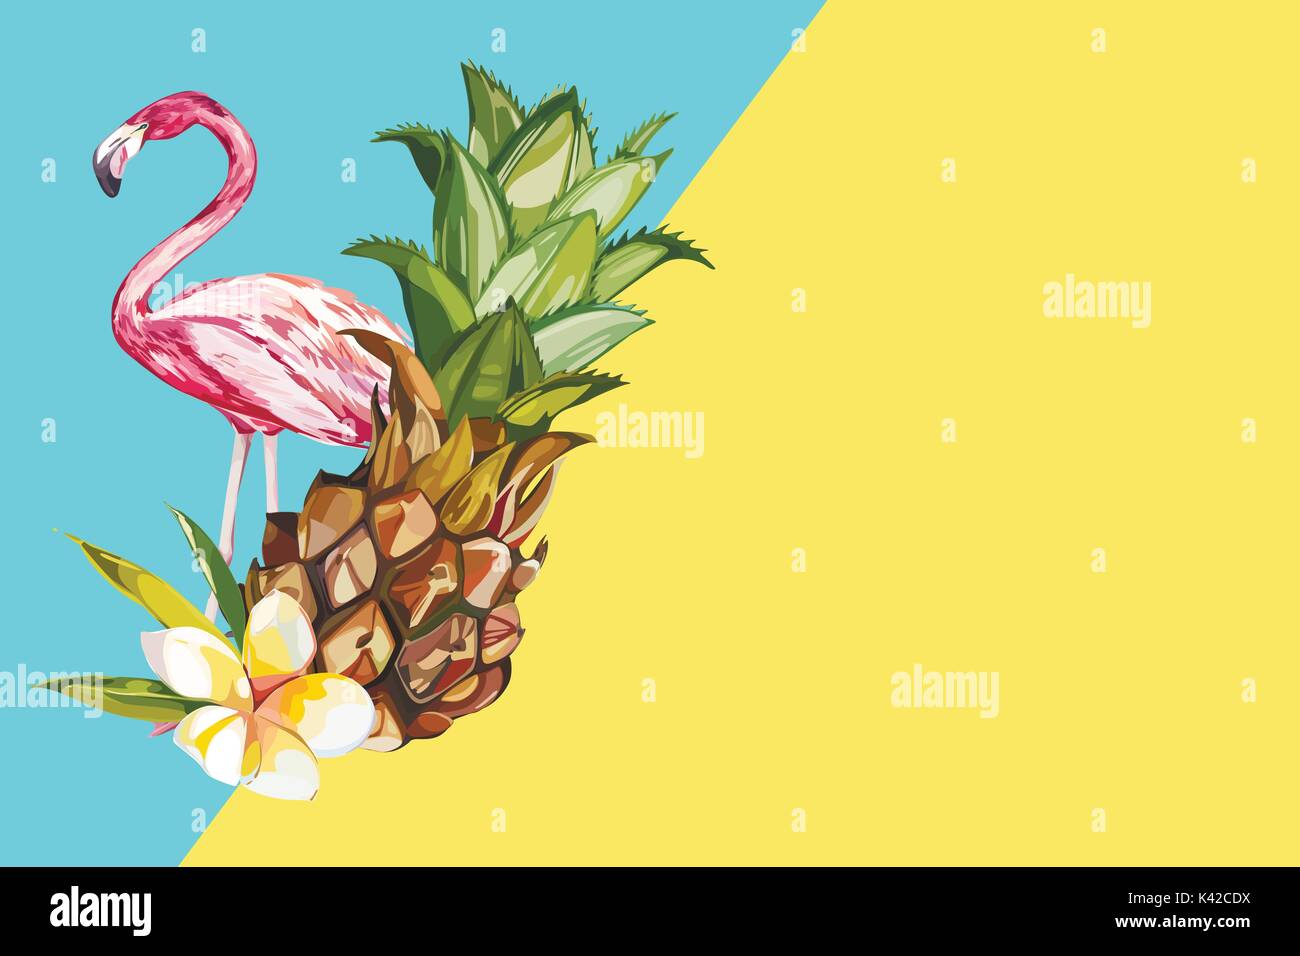 Pineapple with tropical flowers and Flamingo. Element for design of invitations, movie posters, fabrics and other objects. Isolated on white. Vector EPS 10 Stock Vector